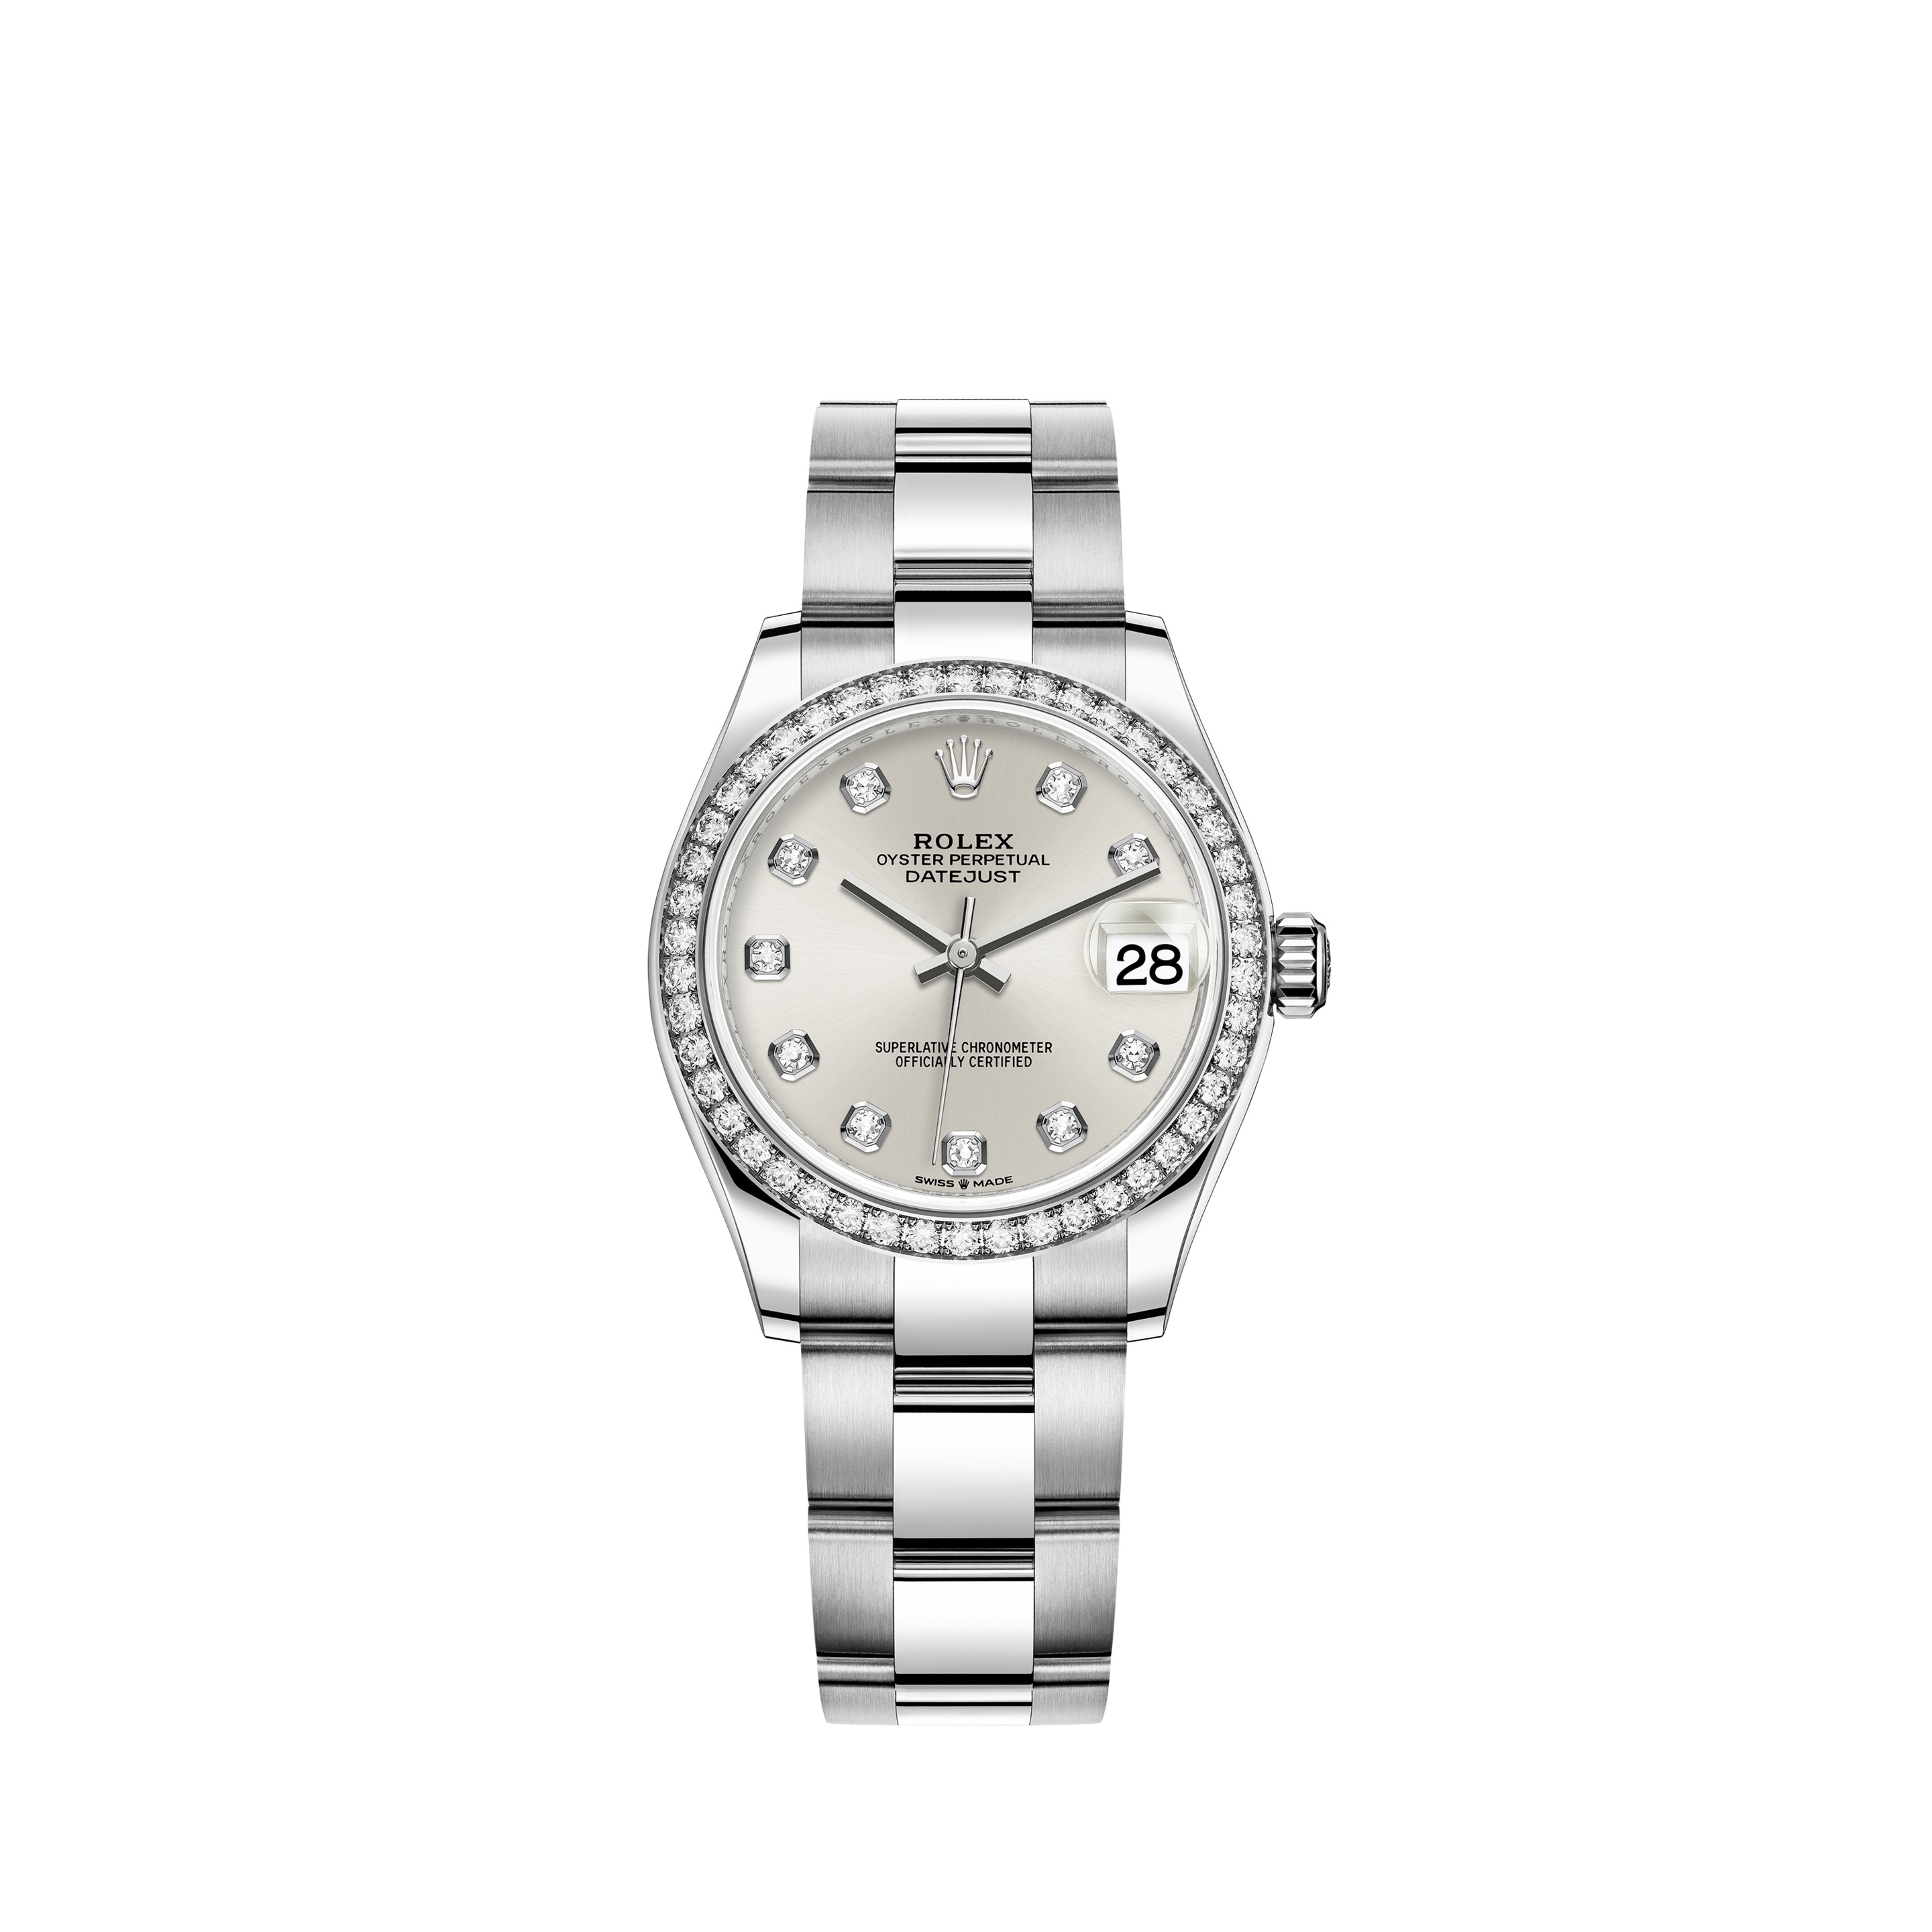 Datejust 31 278384RBR White Gold & Stainless Steel Watch (Silver Set with Diamonds)